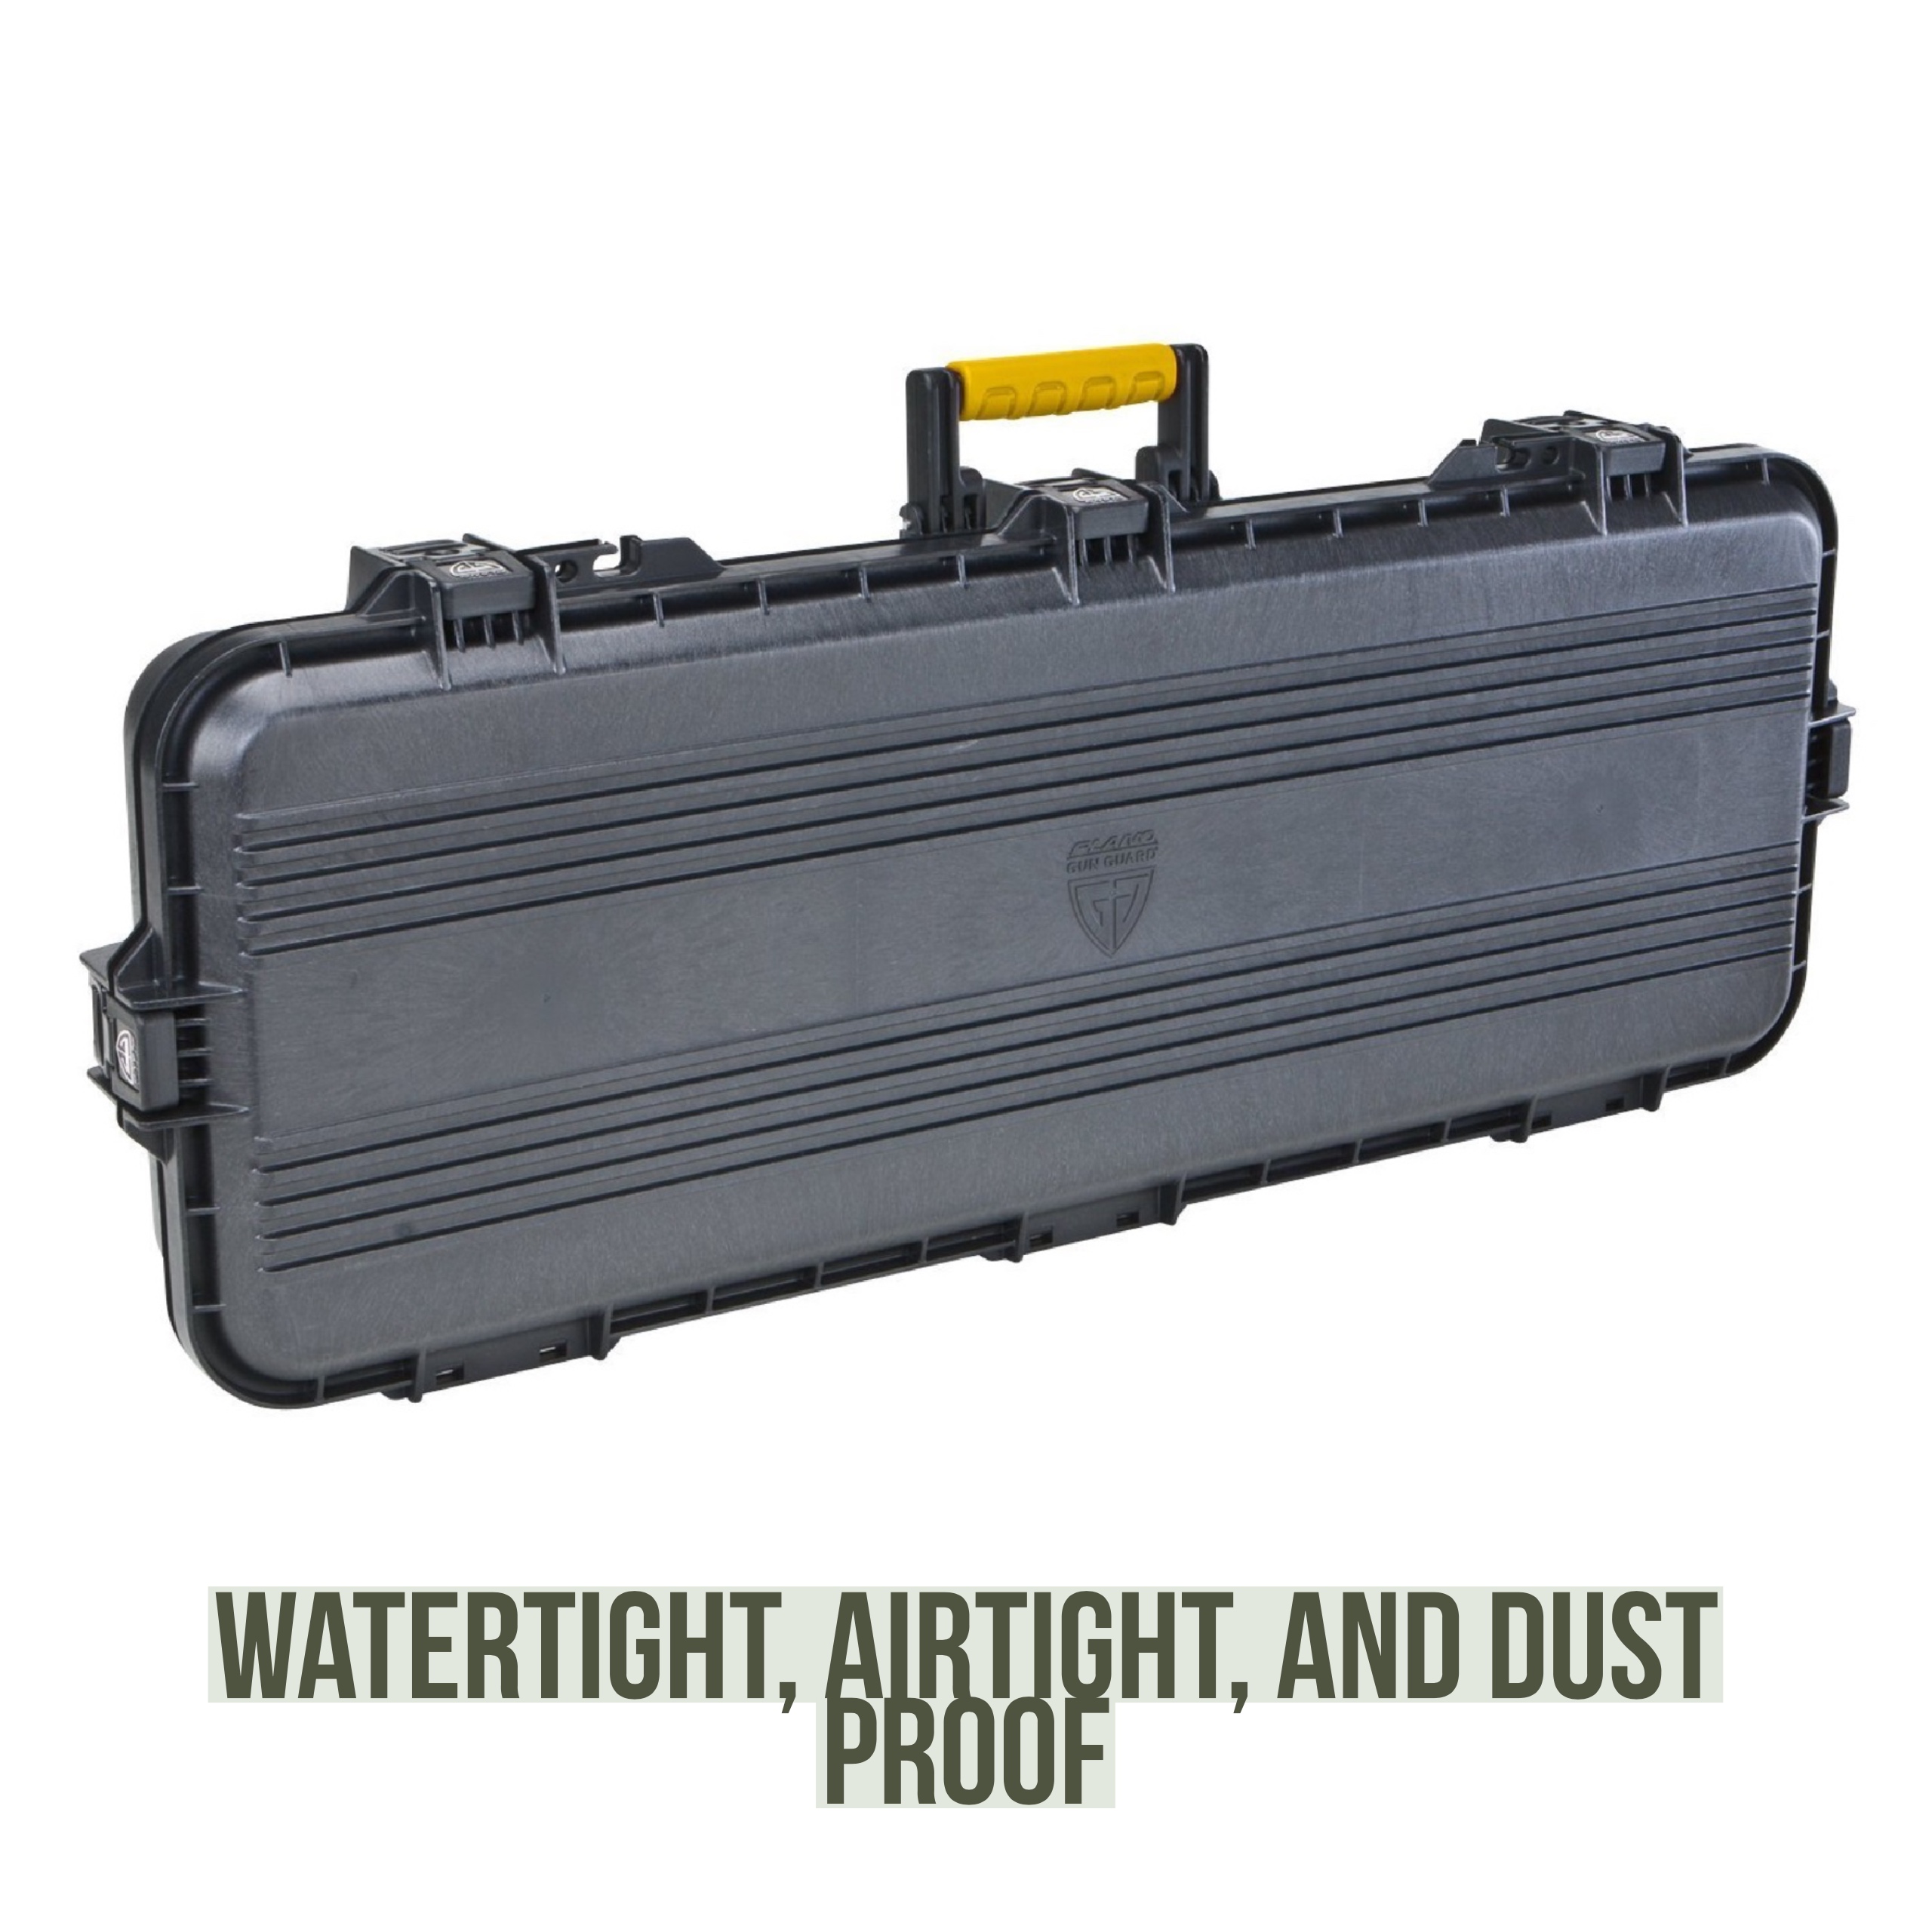 Plano All Weather Single Rifle Case, Black - image 5 of 9